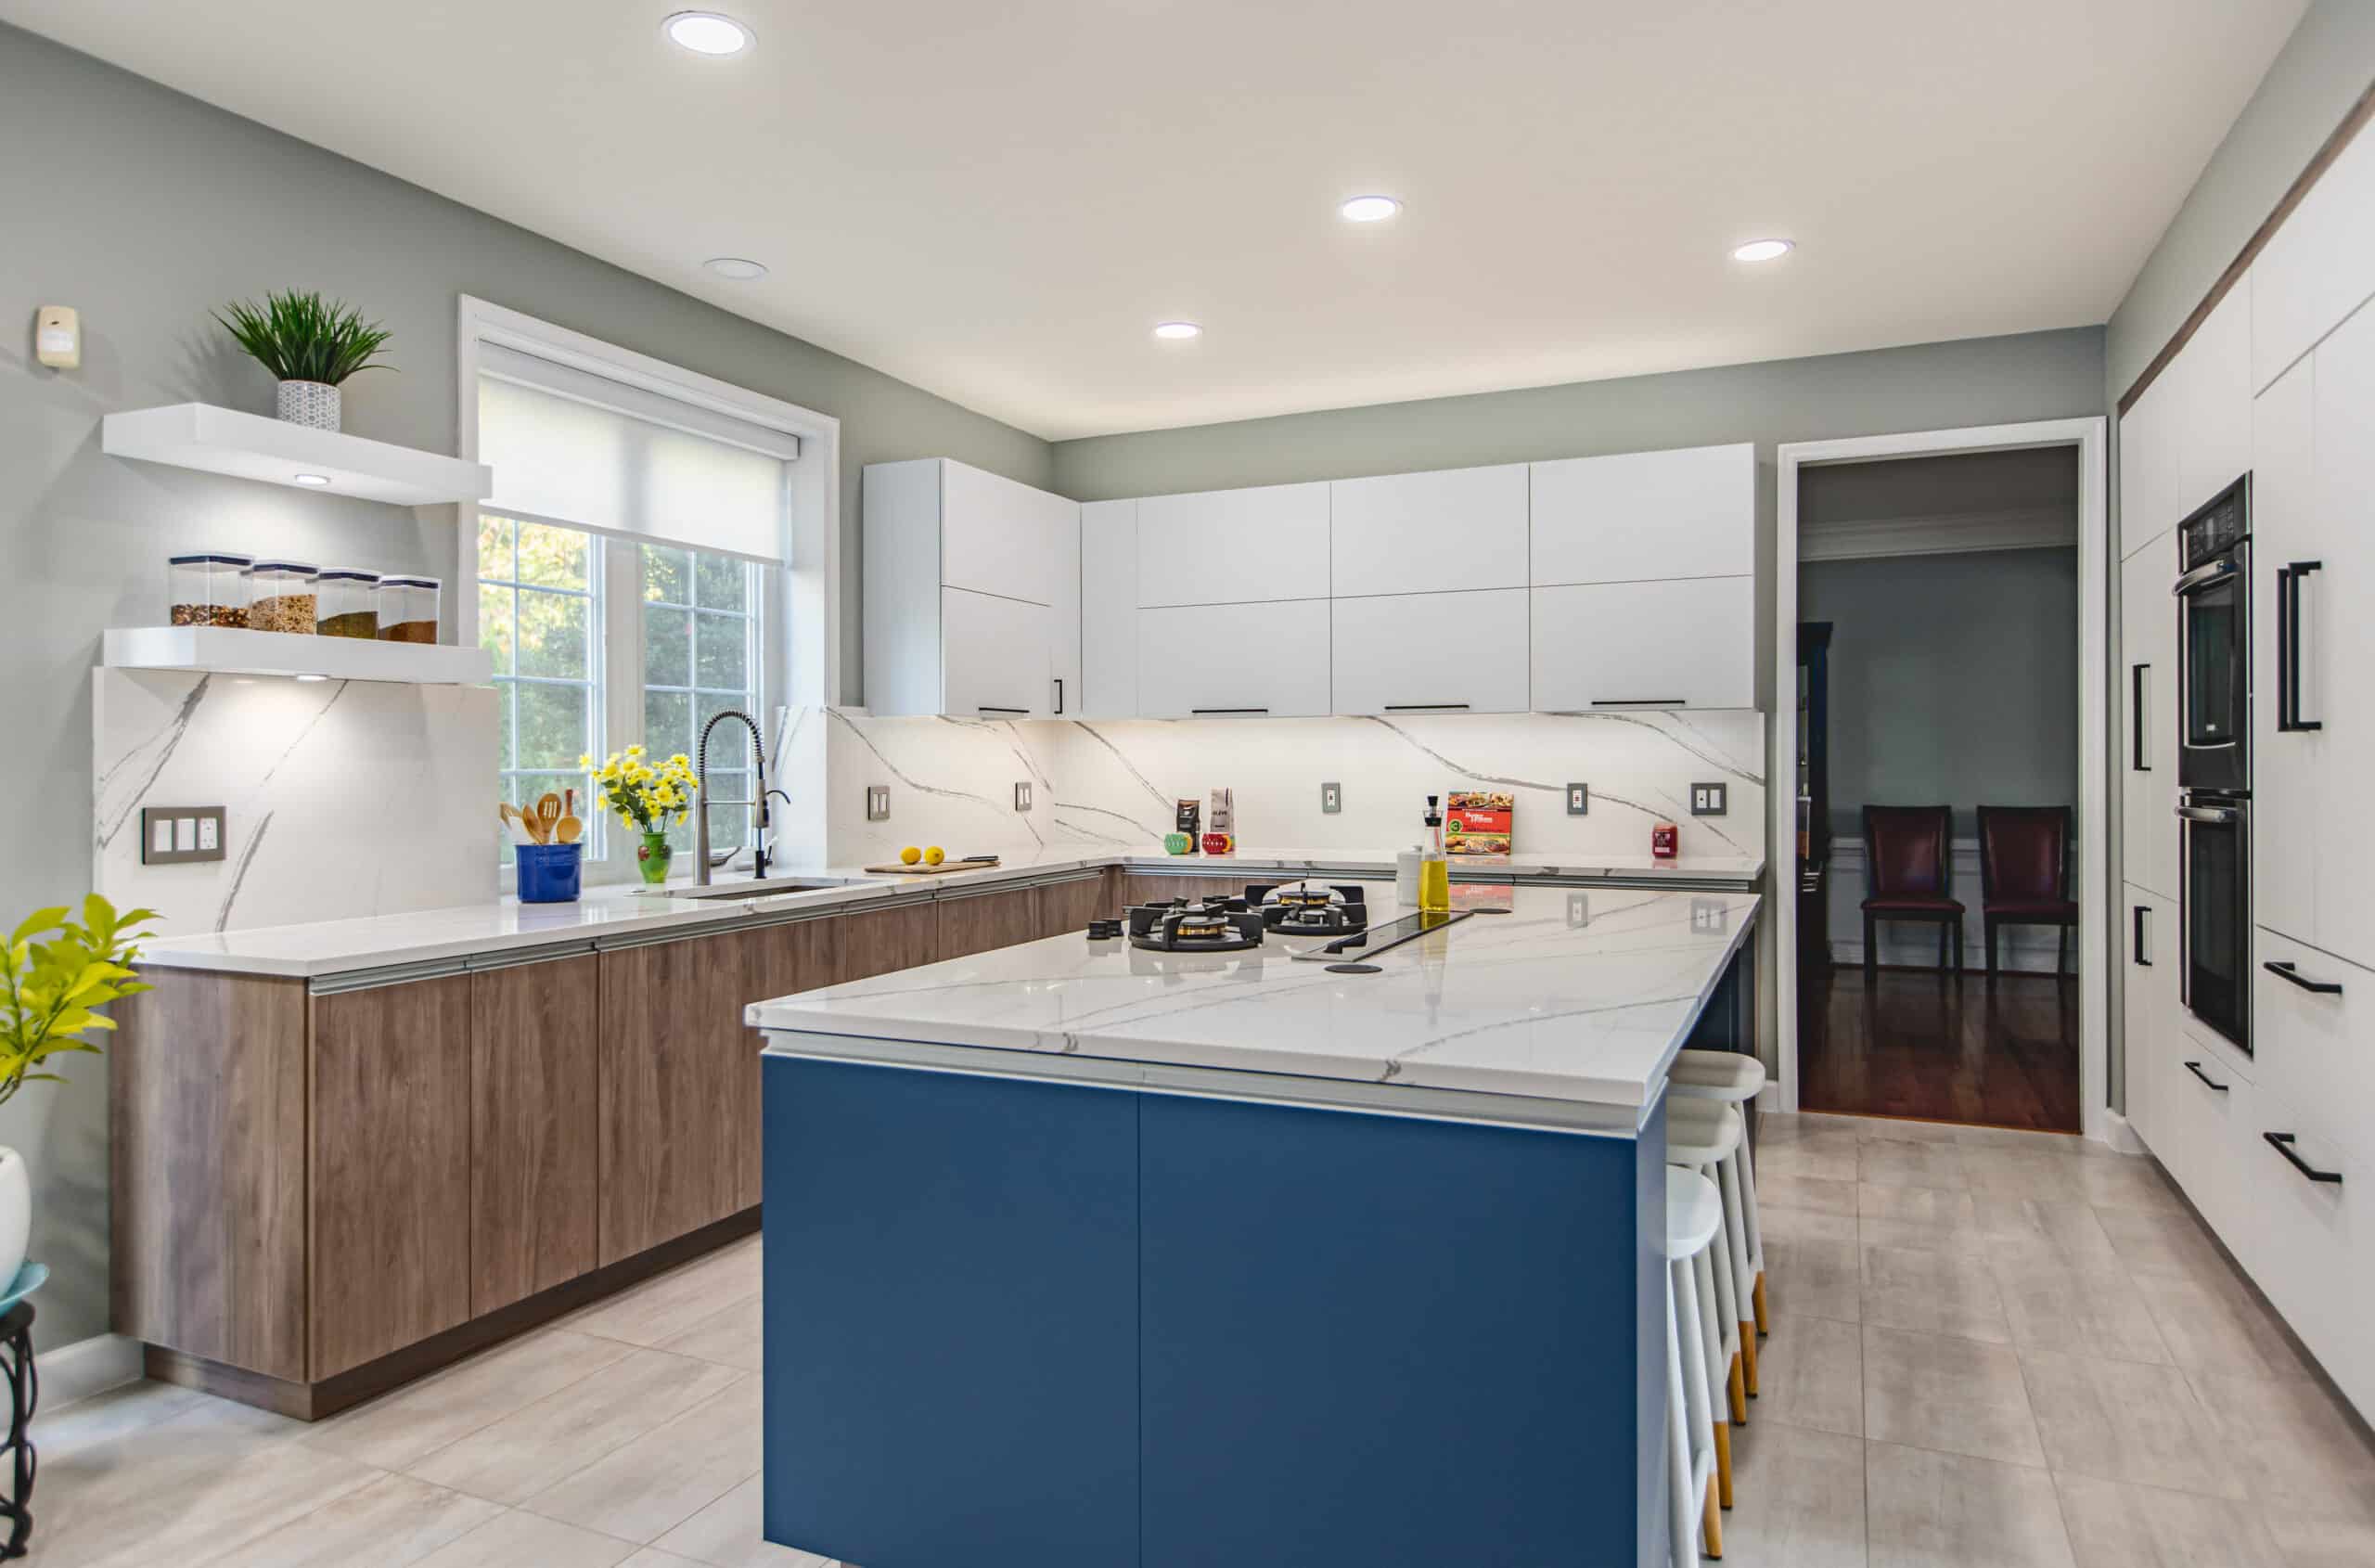 A kitchen with blue cabinets and white countertops